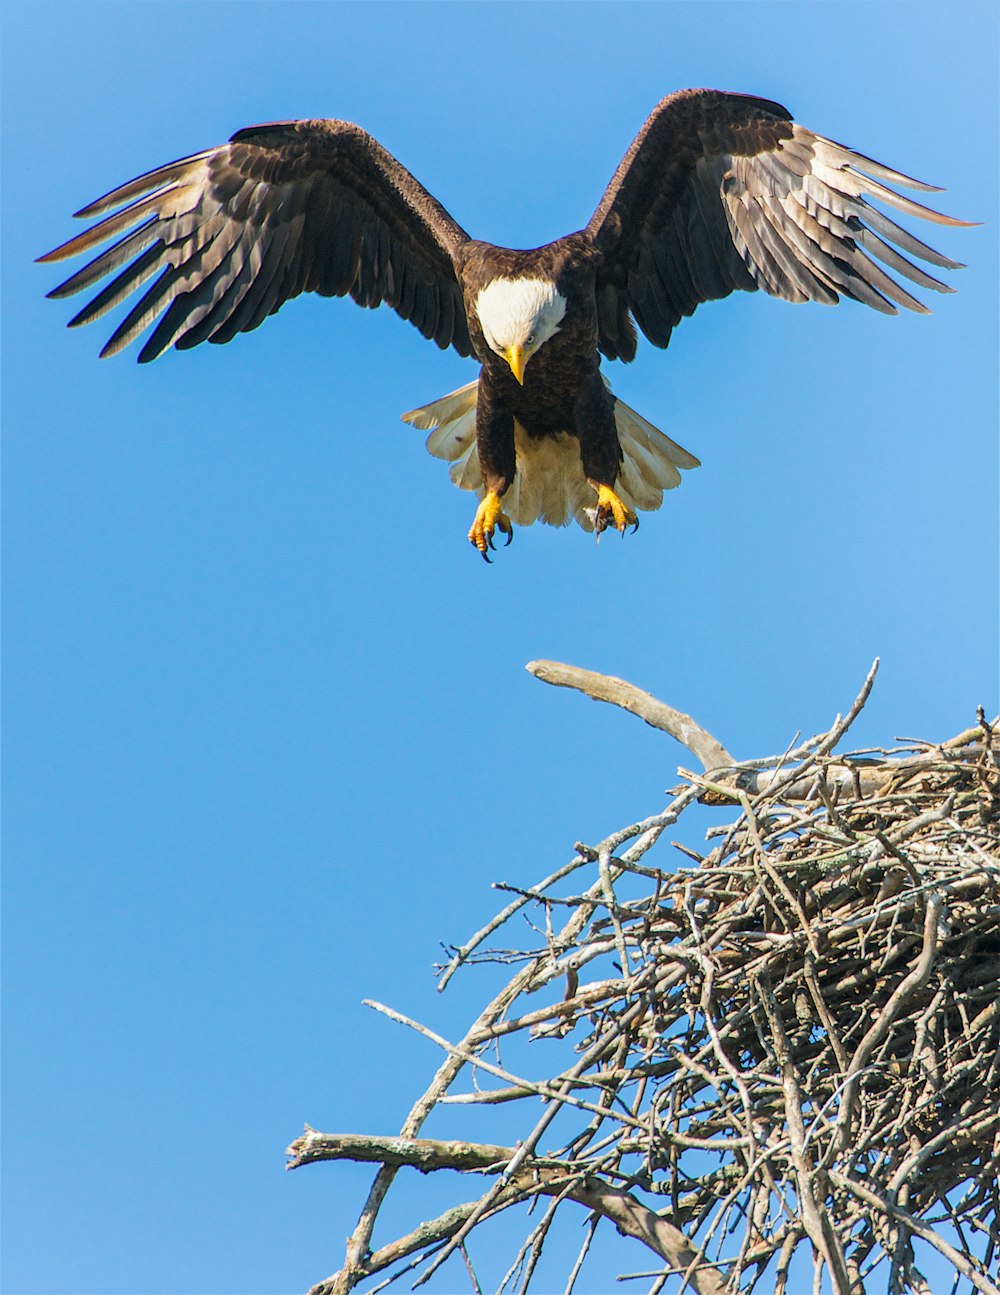 bald eagle flap its wing from nest